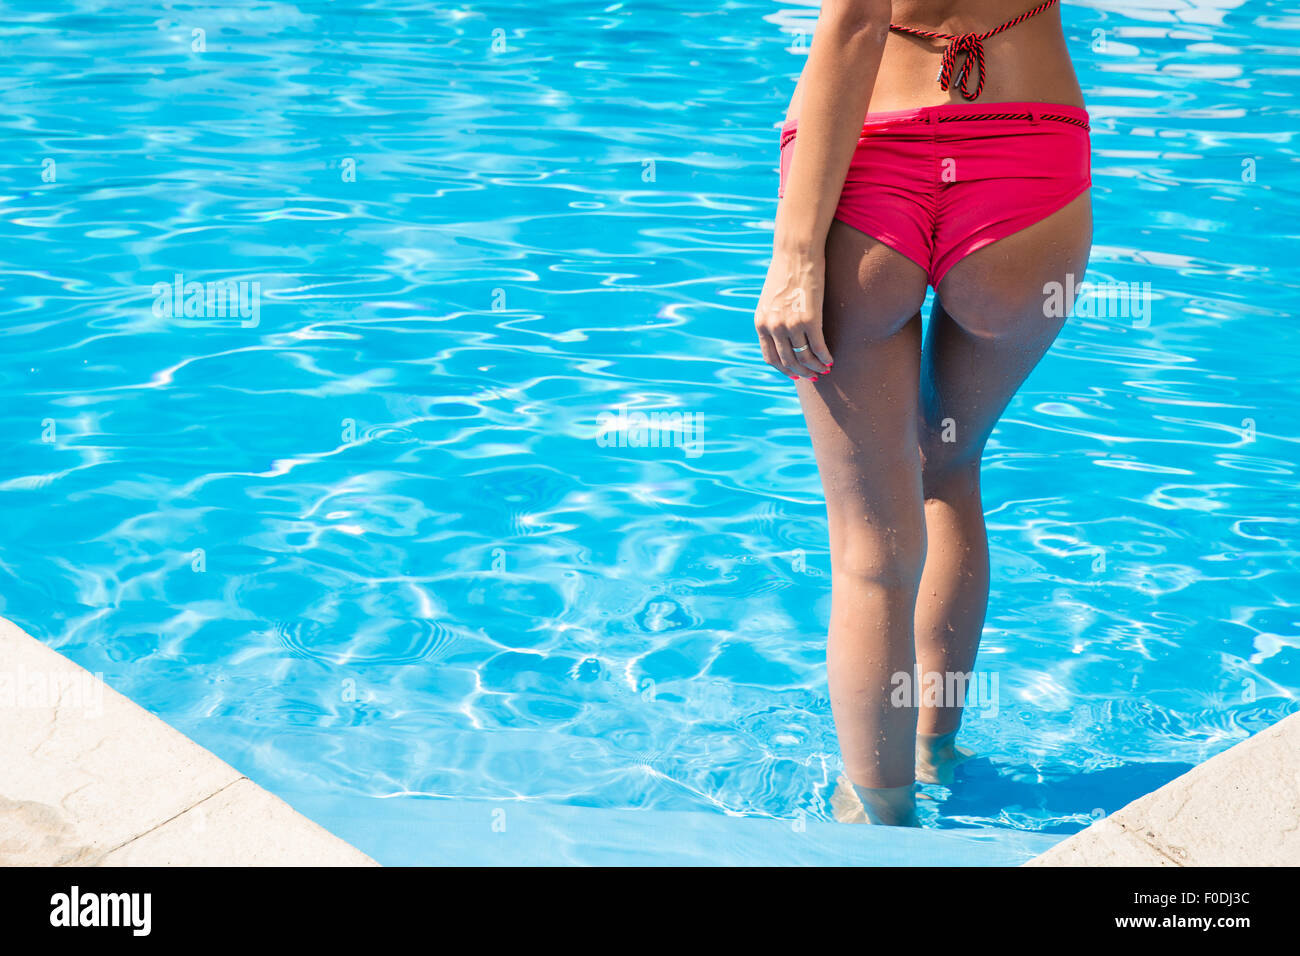 Back view portrait of a young woman standing in swimming pool Stock Photo